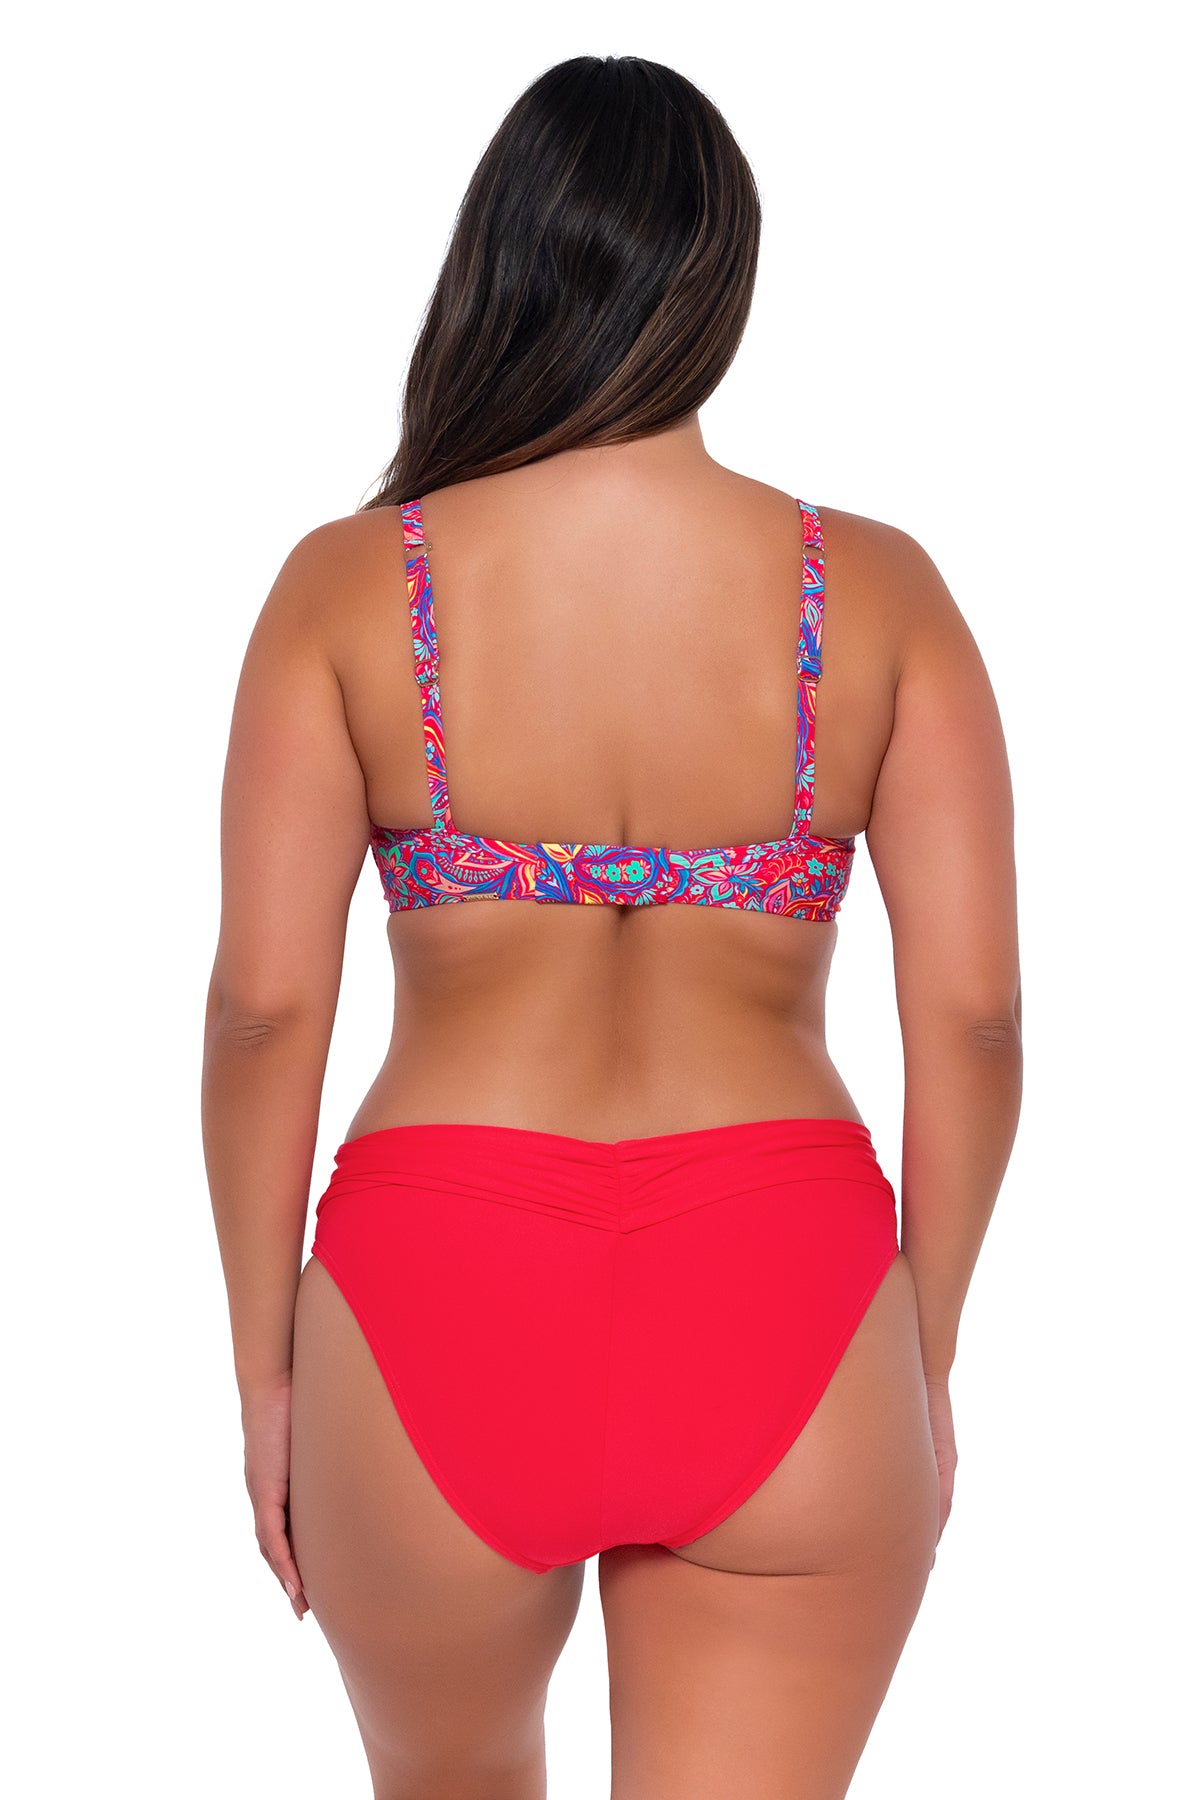 Back pose #1 of Nicky wearing Sunsets Rue Paisley Crossroads Underwire Top with matching Unforgettable Bottom bikini